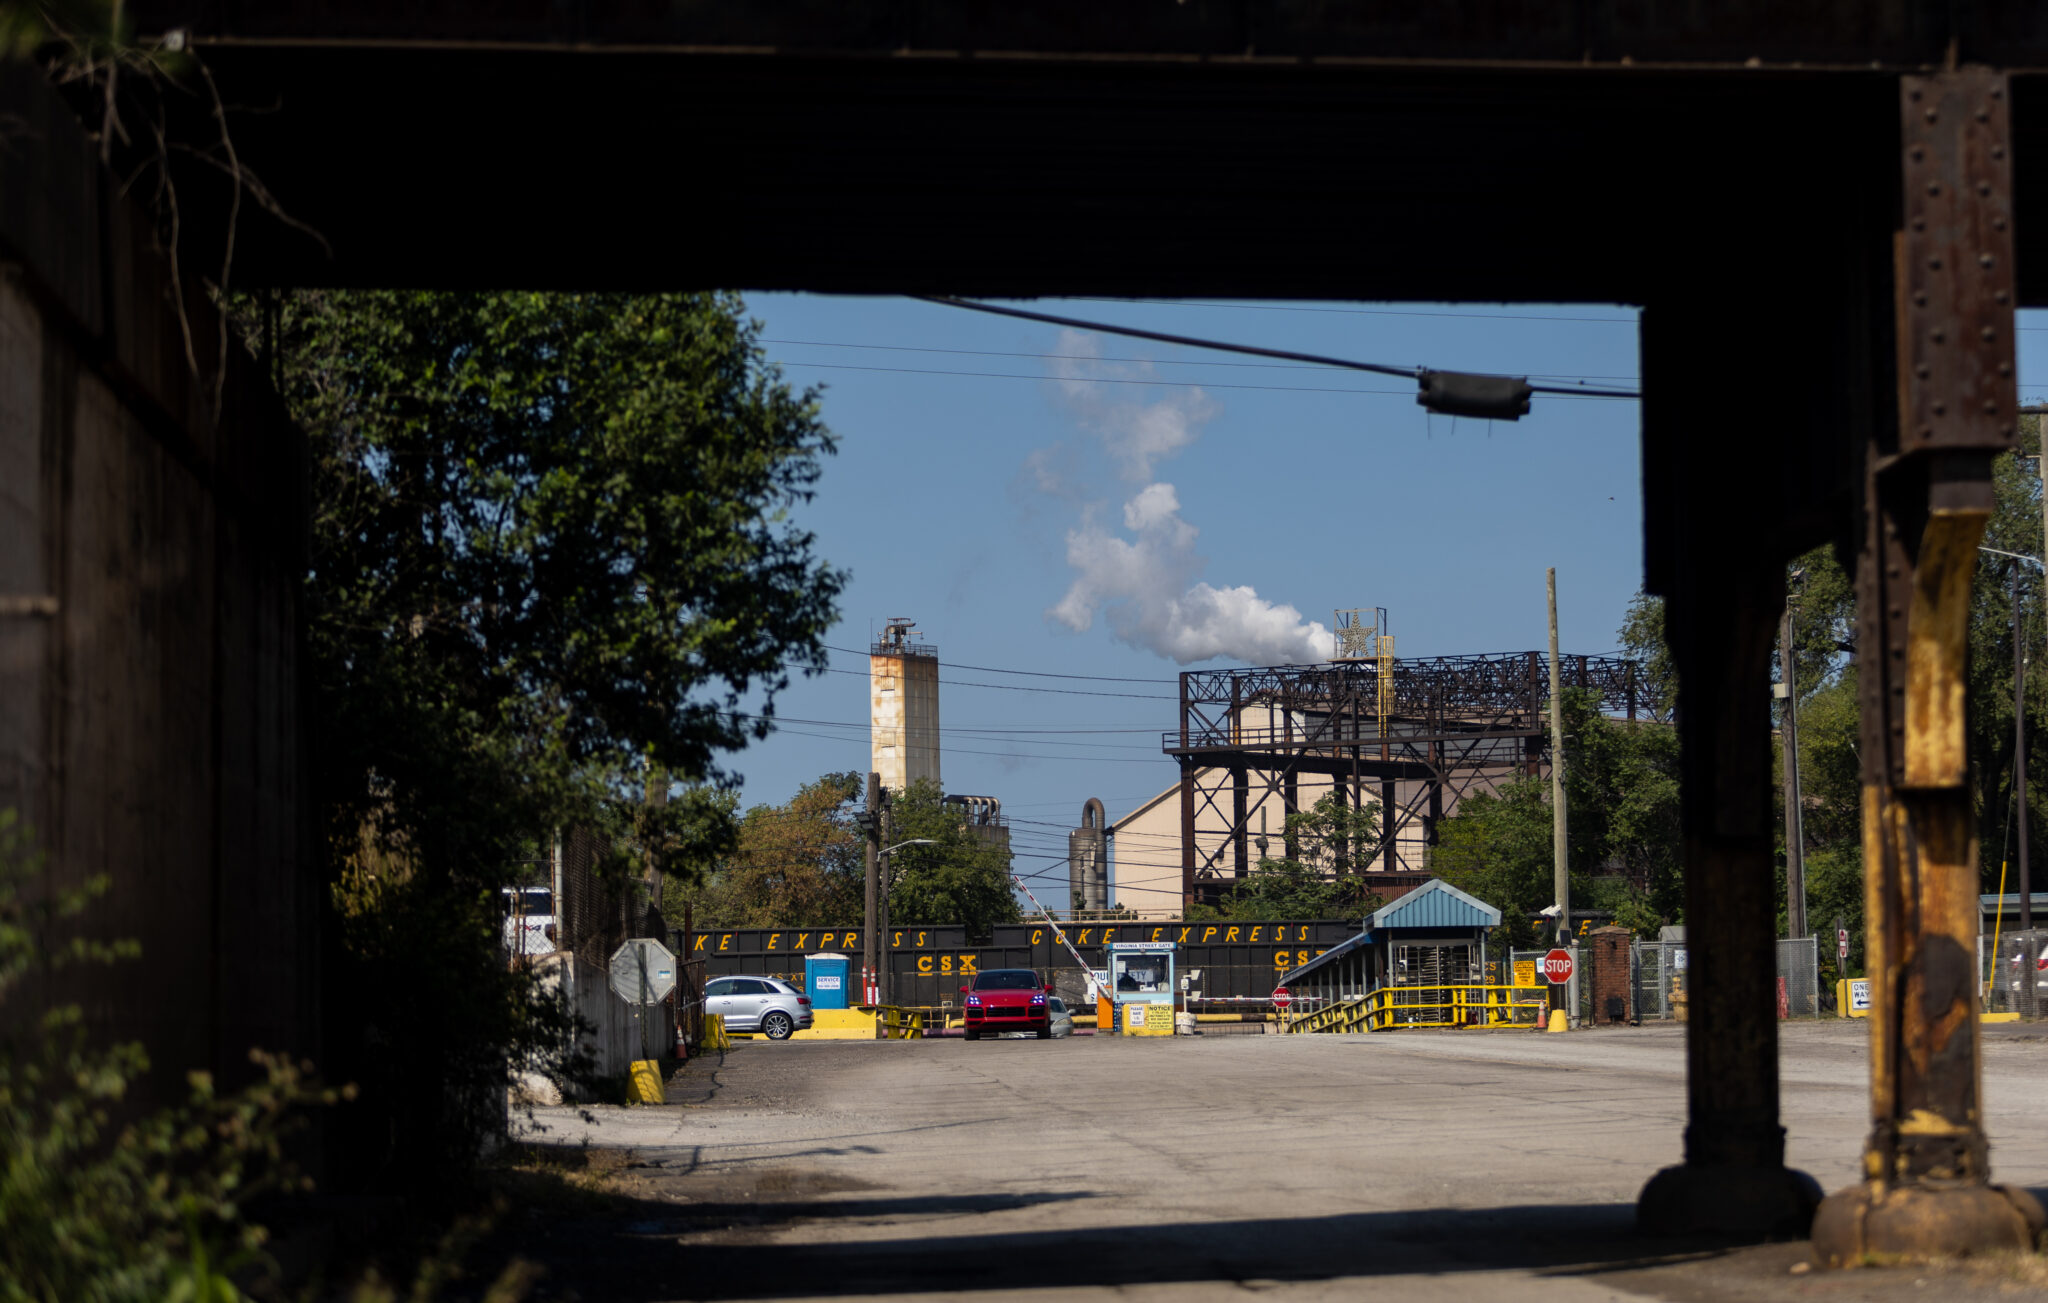 The U.S. Steel Corporation Gary Works, Tennessee St. gate, in Gary, Indiana, in September. The Gary Works was the largest greenhouse gas emitting iron and steel plant in the U.S. in 2022 with 10.3 million metric tons of carbon dioxide emissions. Credit: Vincent D. Johnson / for Inside Climate News